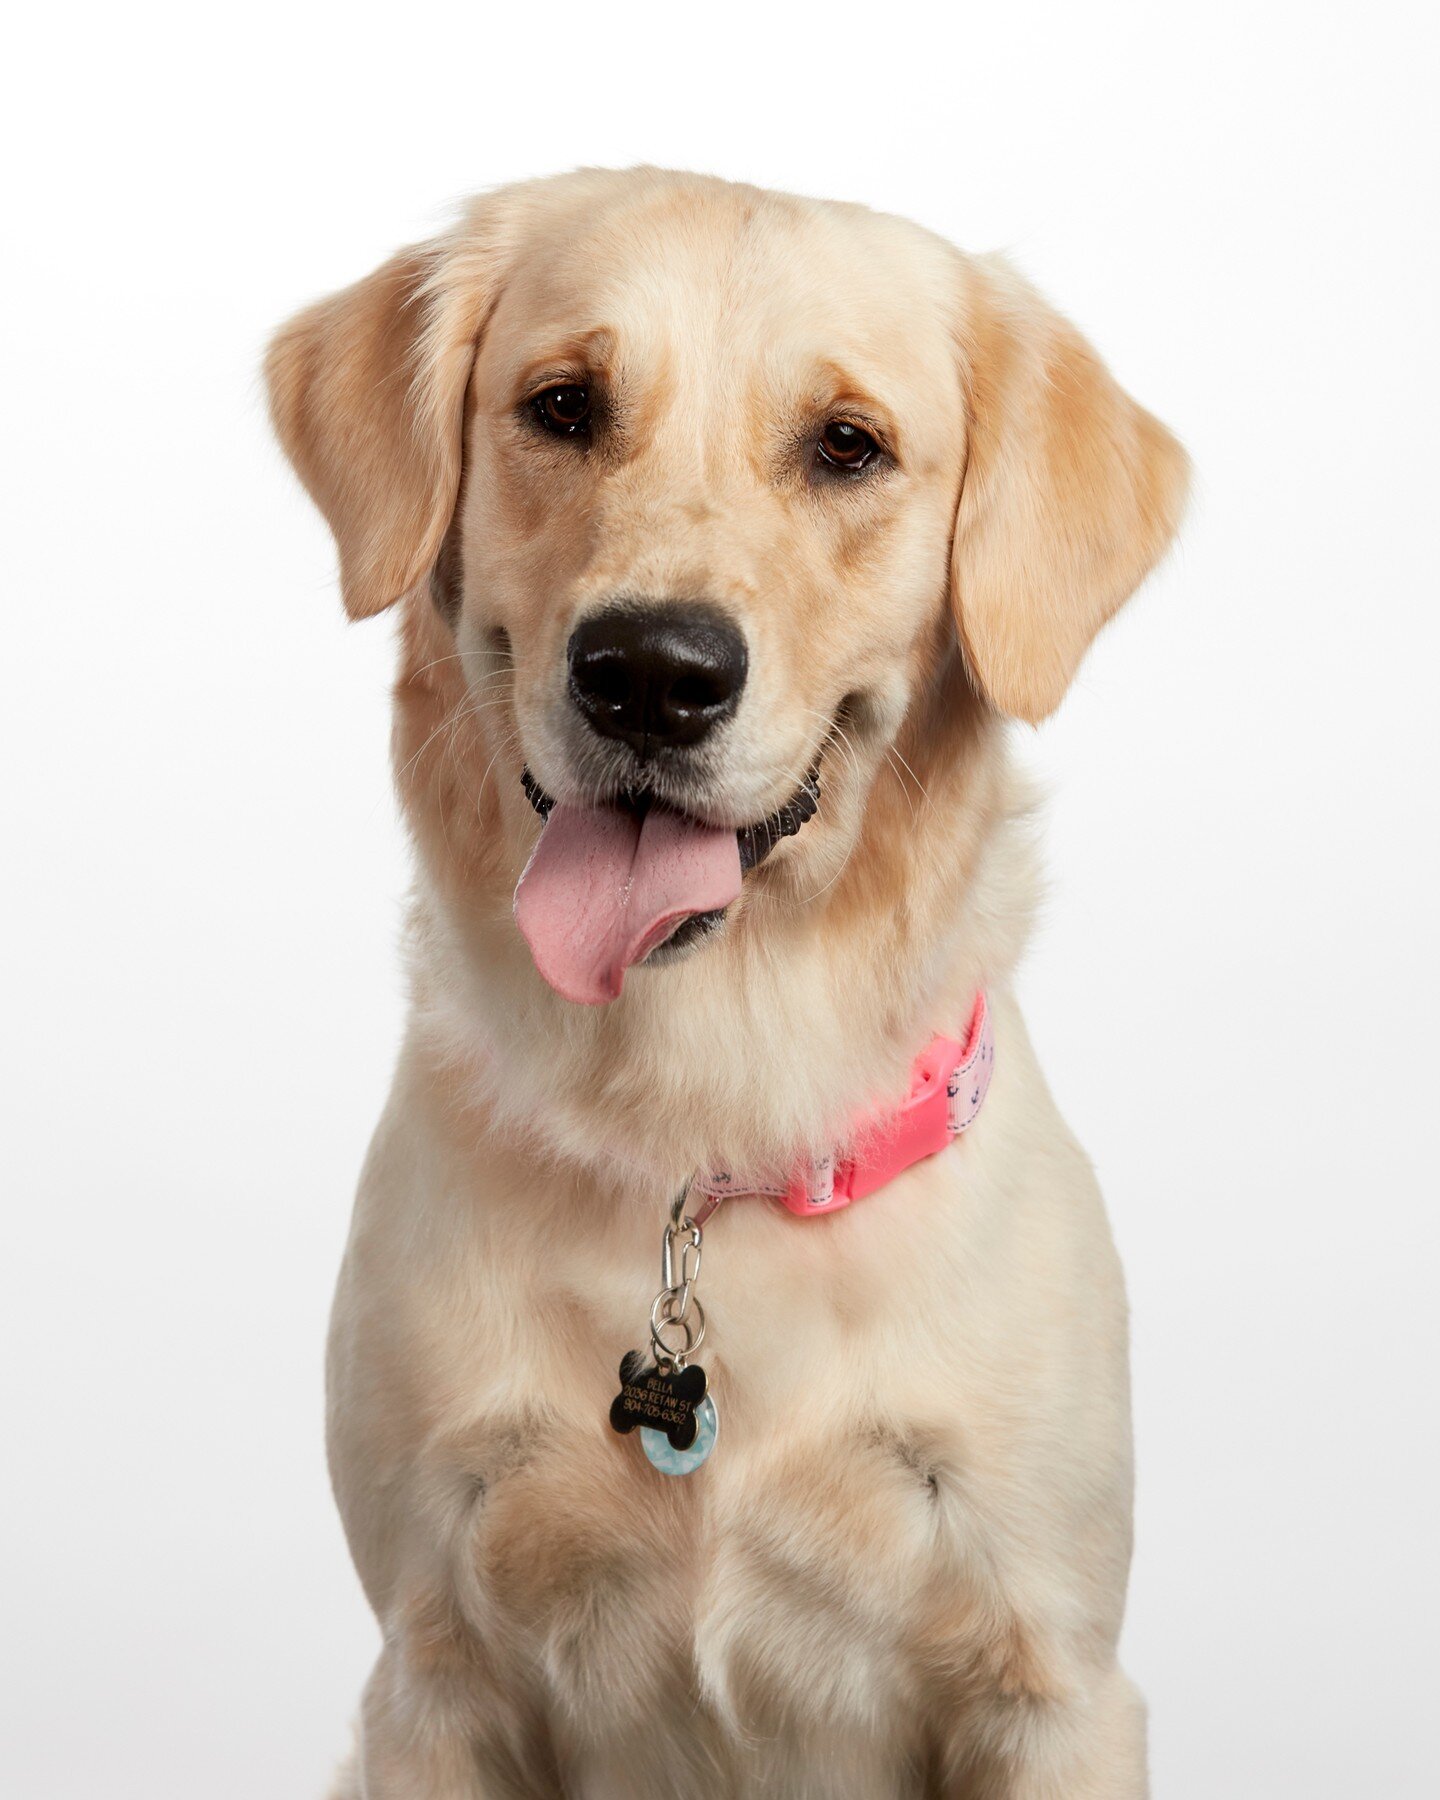 Happy Monday from Bella the goodest girl Golden Retriever.

Interested in dog portraits? Click the &lsquo;Book Now&rsquo; button. 

#dogsofinstagram #instadog #petstagram #igersjax #petsofinstagram #dogmodel #dogs #pets #dogoftheday #doglife #doglove